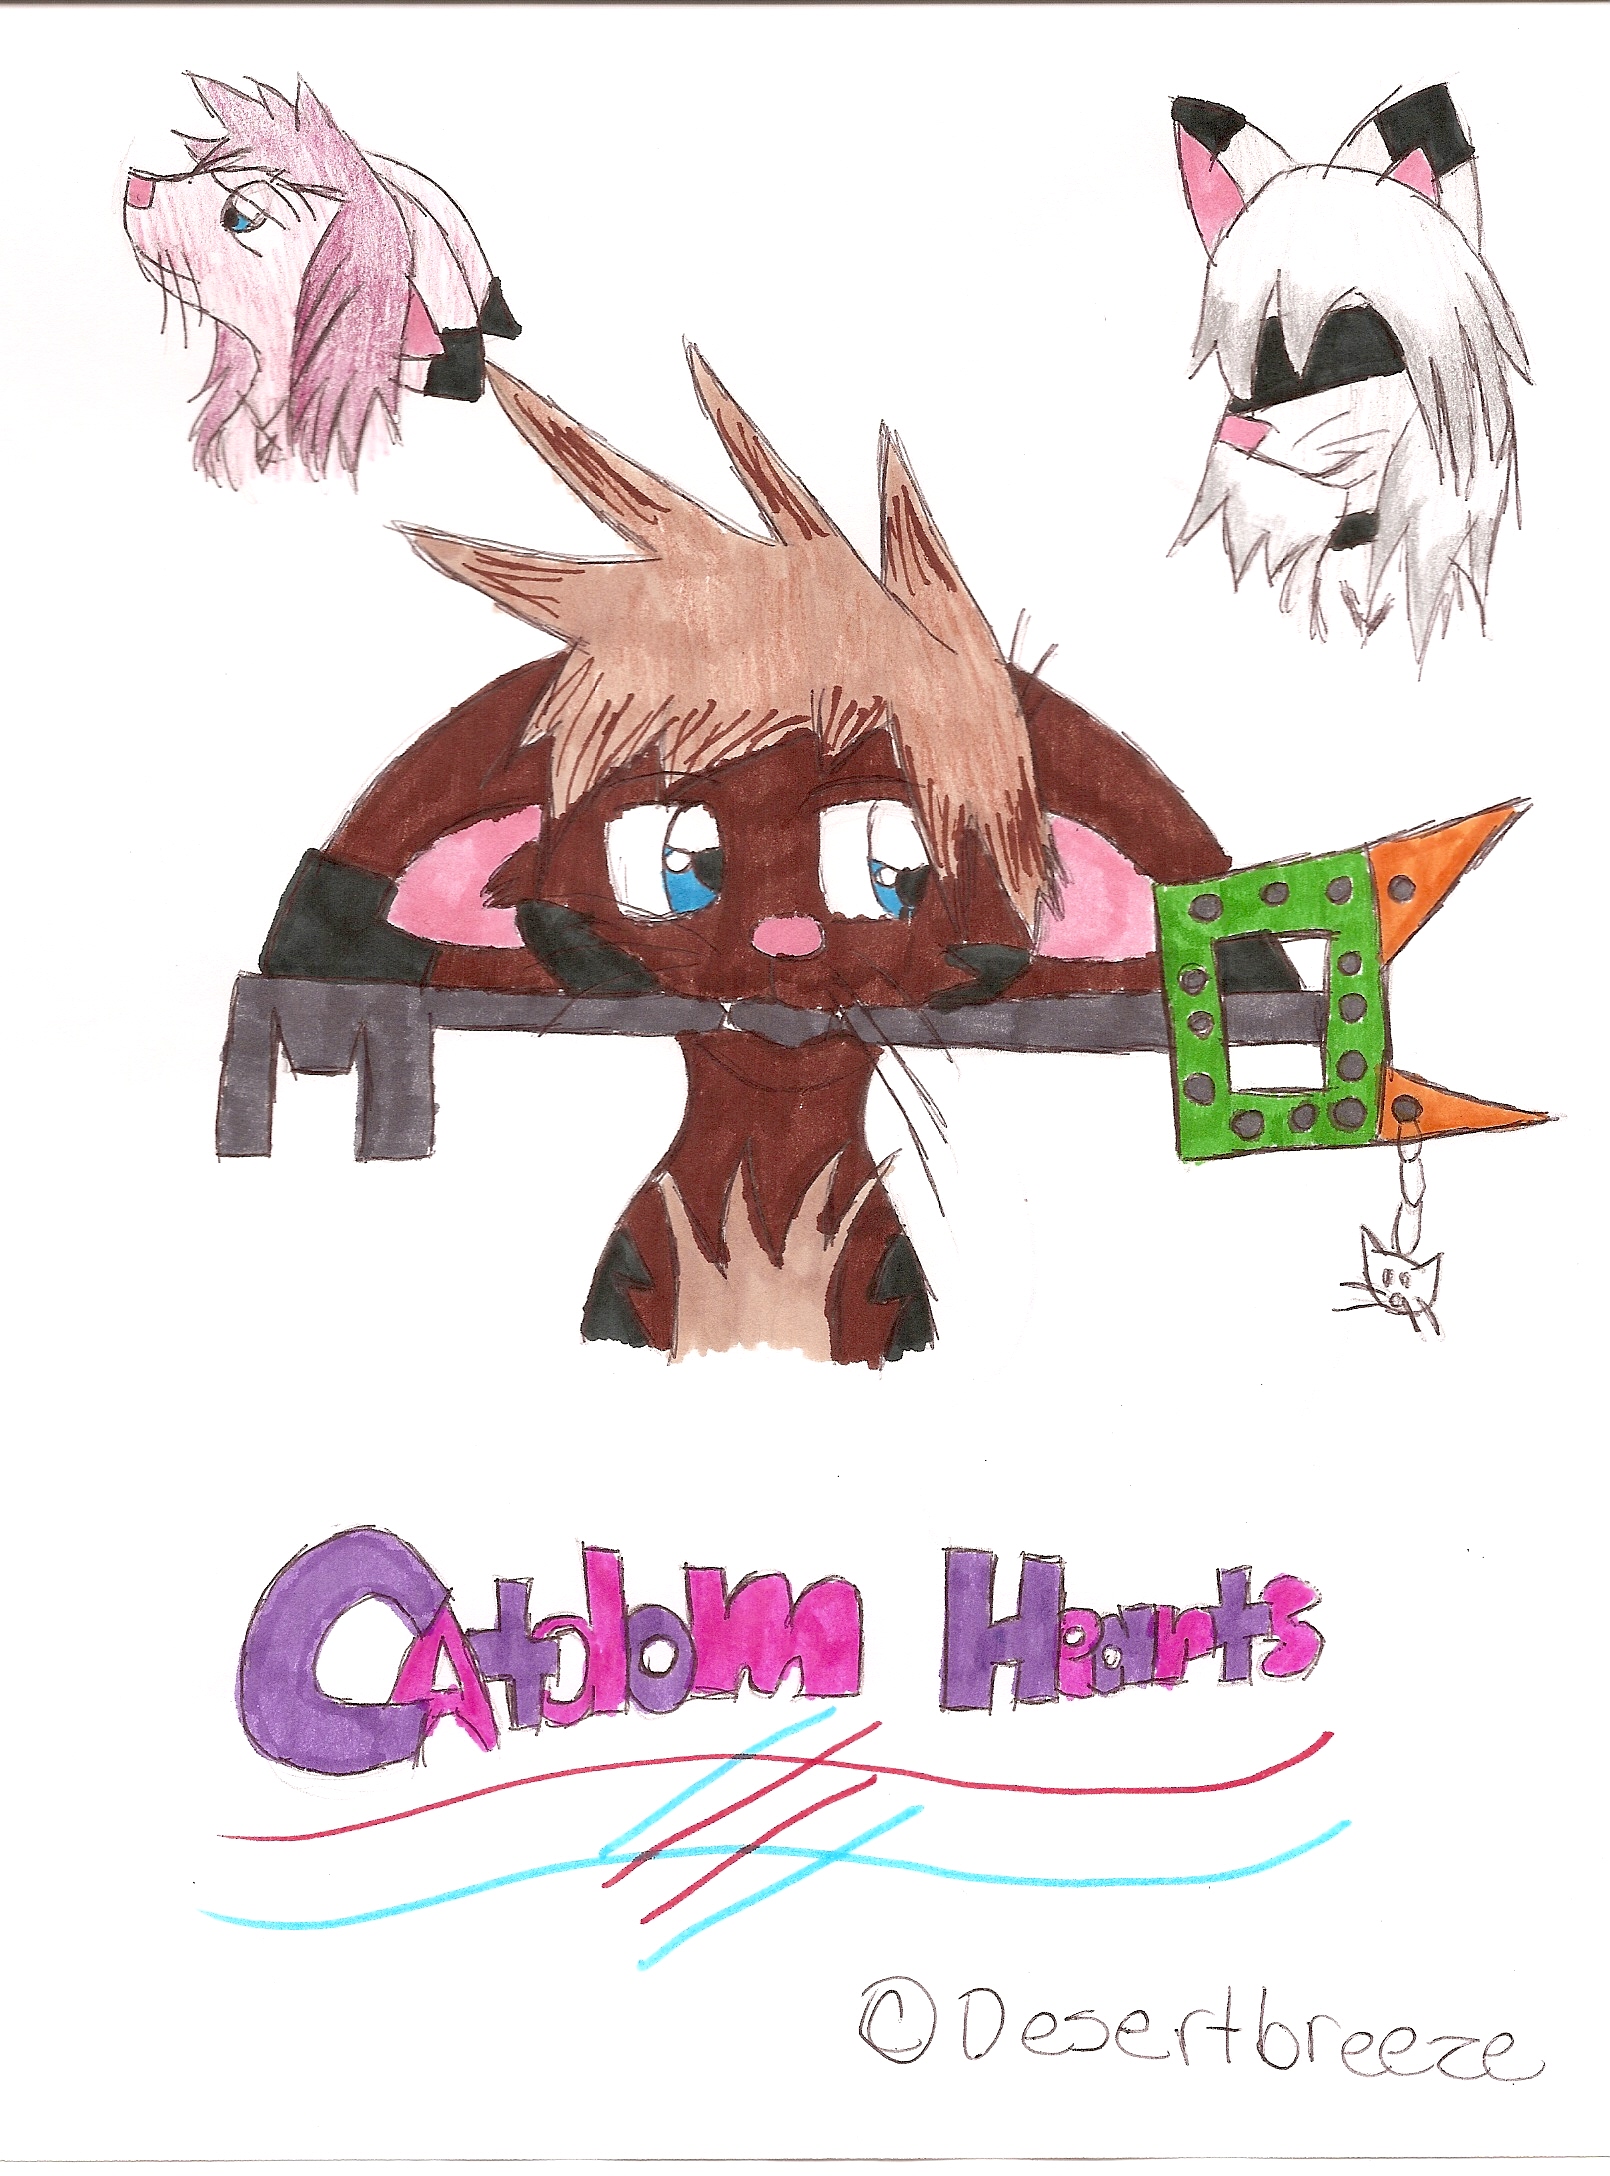 Catdom Hearts! by desertbreeze